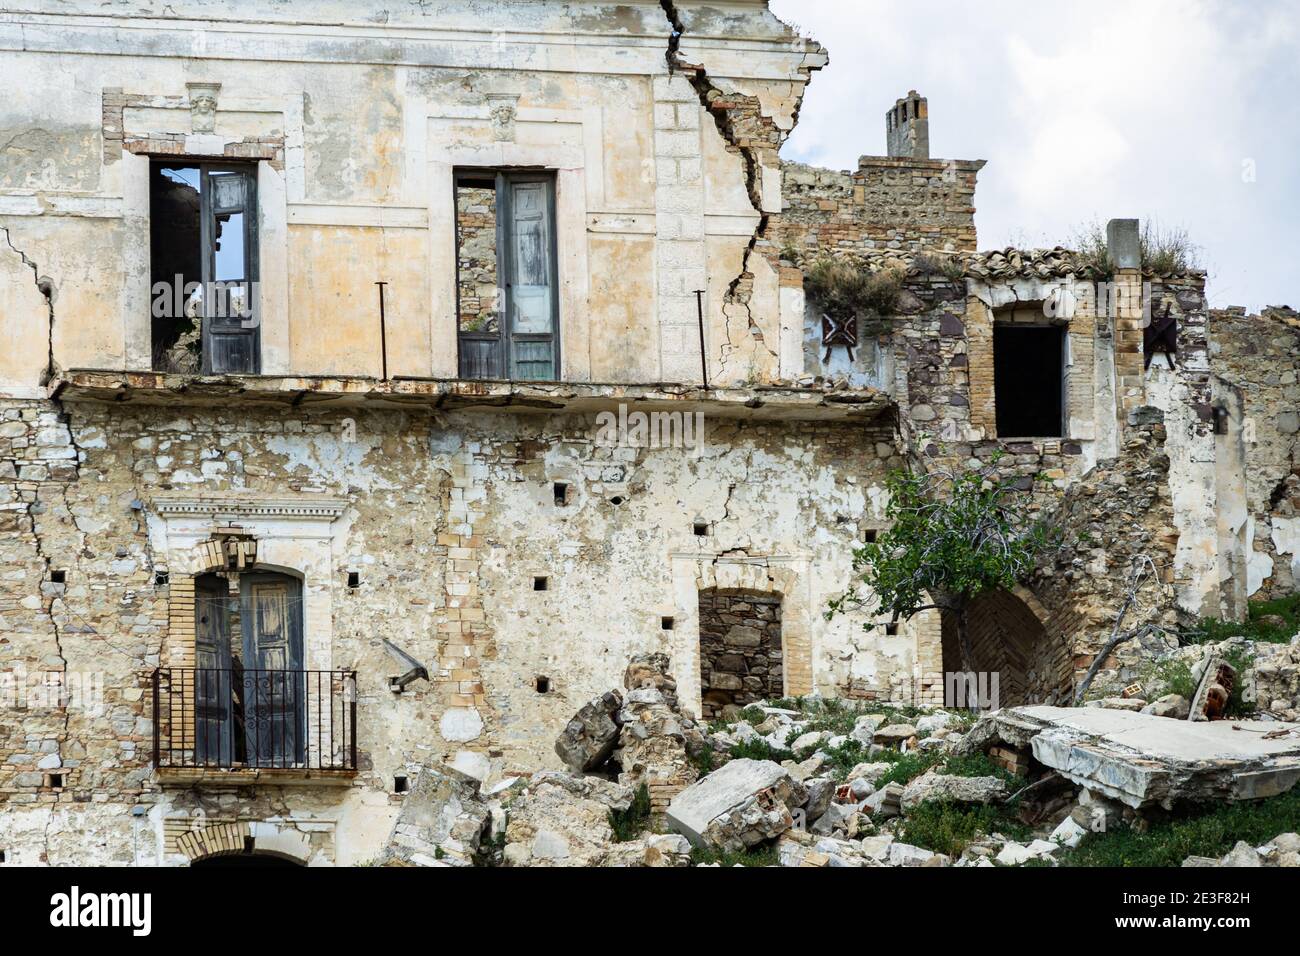 Scenic ruins of abandoned buildings in Craco, an abandoned ghost town in Basilicata region, Italy Stock Photo